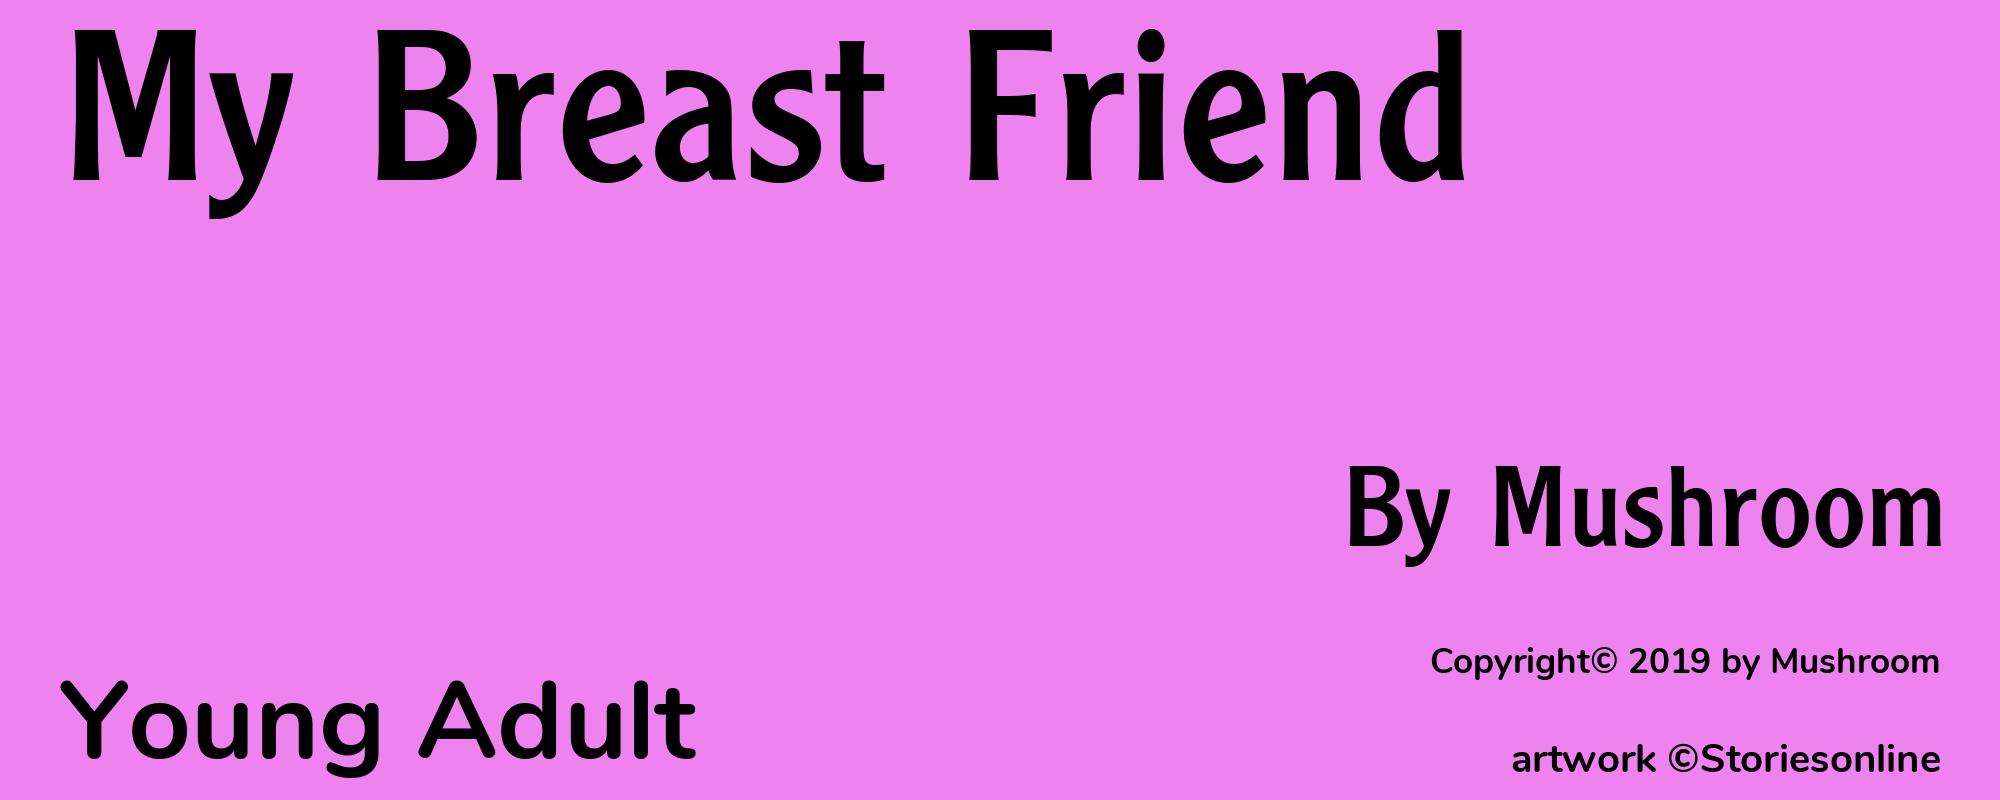 My Breast Friend - Cover